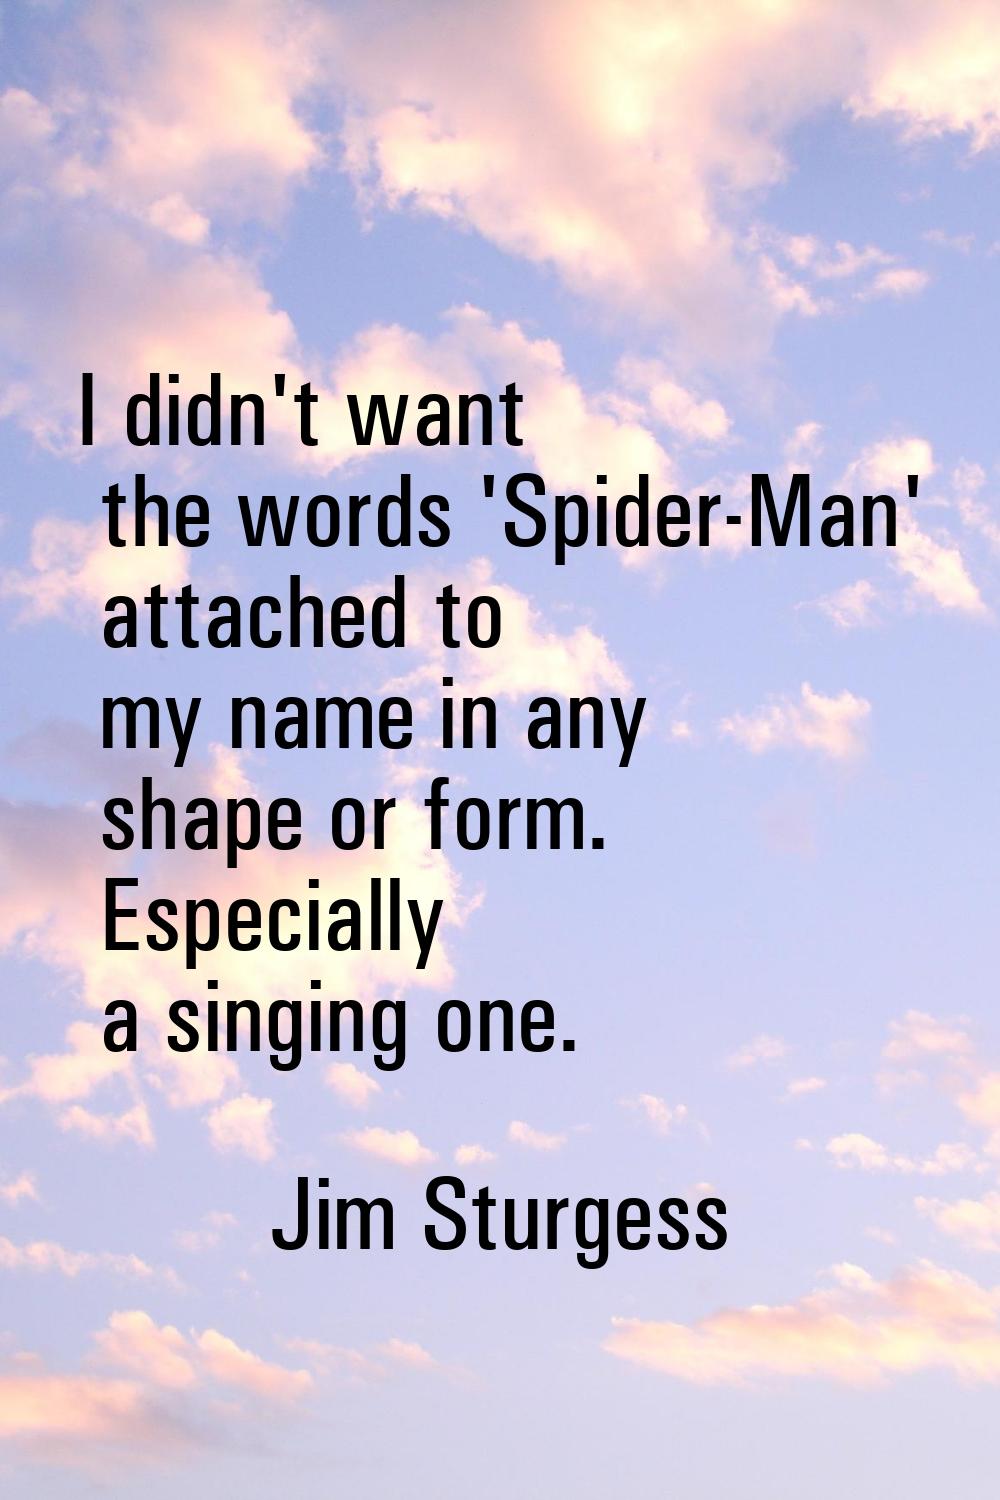 I didn't want the words 'Spider-Man' attached to my name in any shape or form. Especially a singing